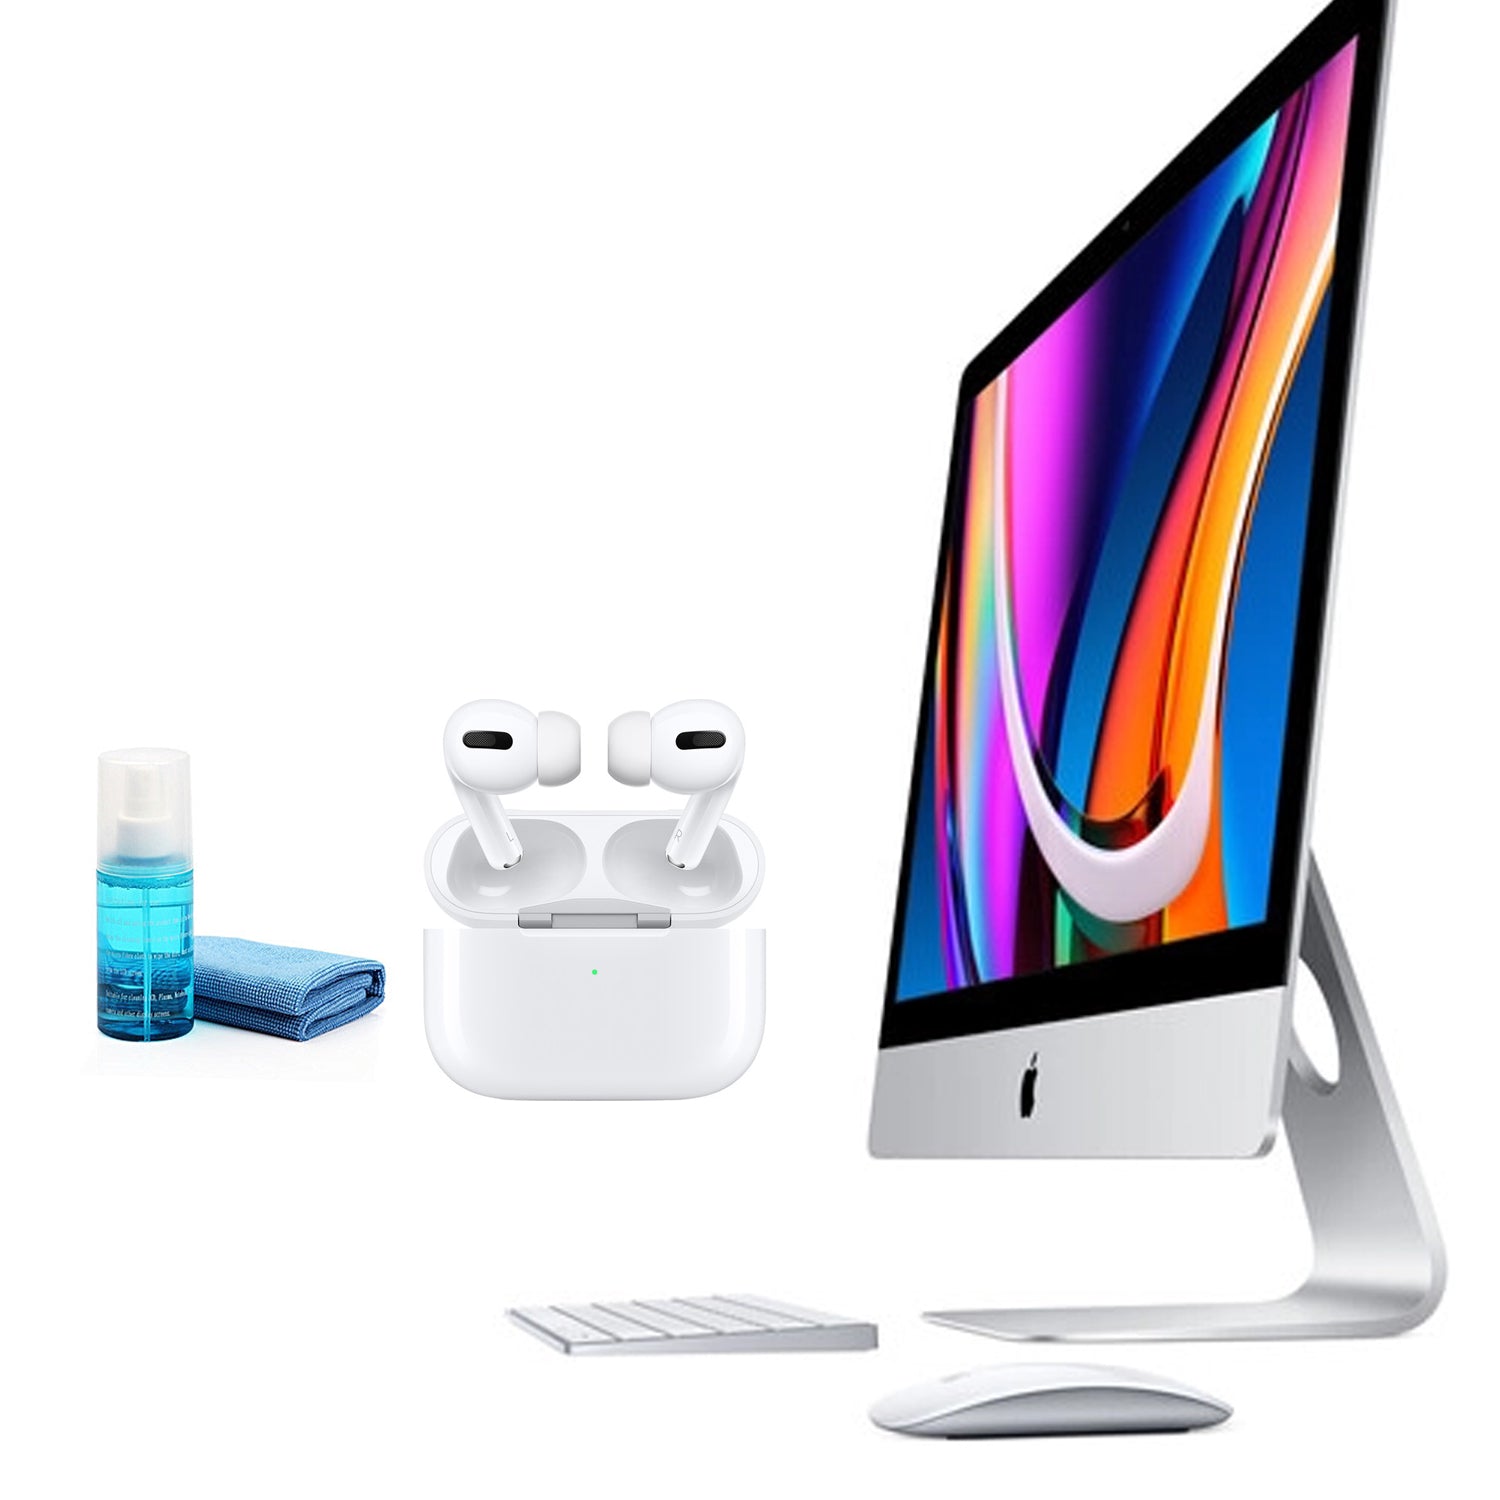 Apple iMac 27 Inch with Retina 5K Display (Mid 2020) with Apple Airpods Pro Office Bundle